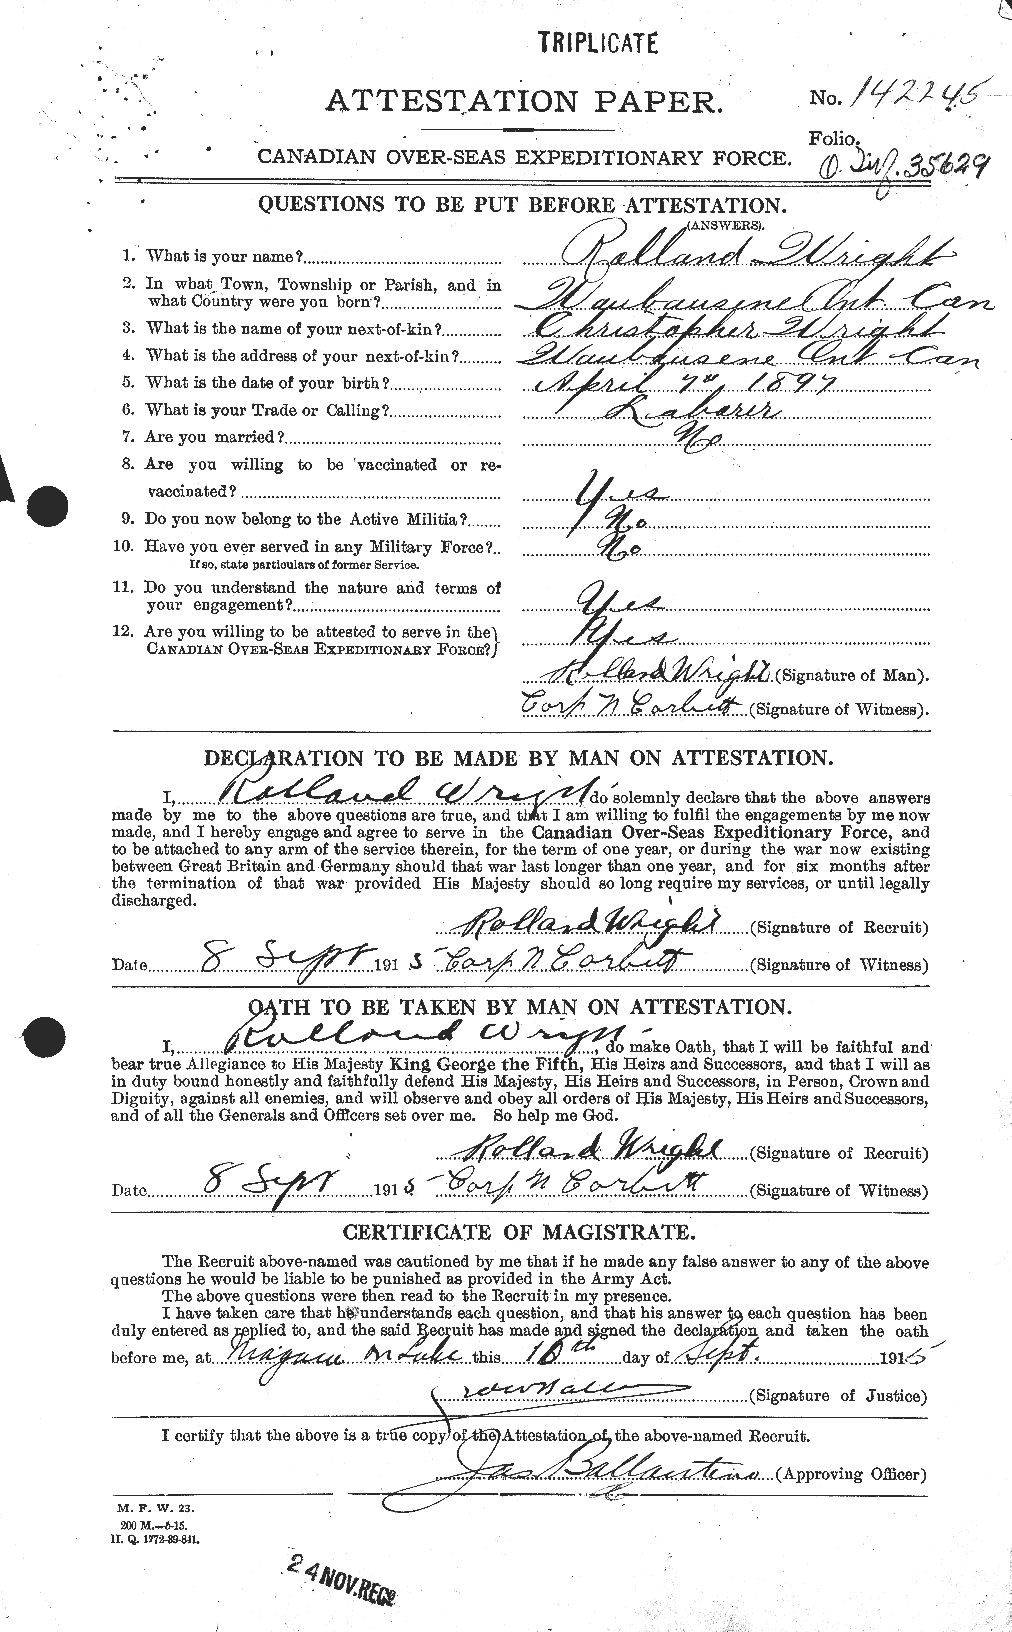 Personnel Records of the First World War - CEF 688525a